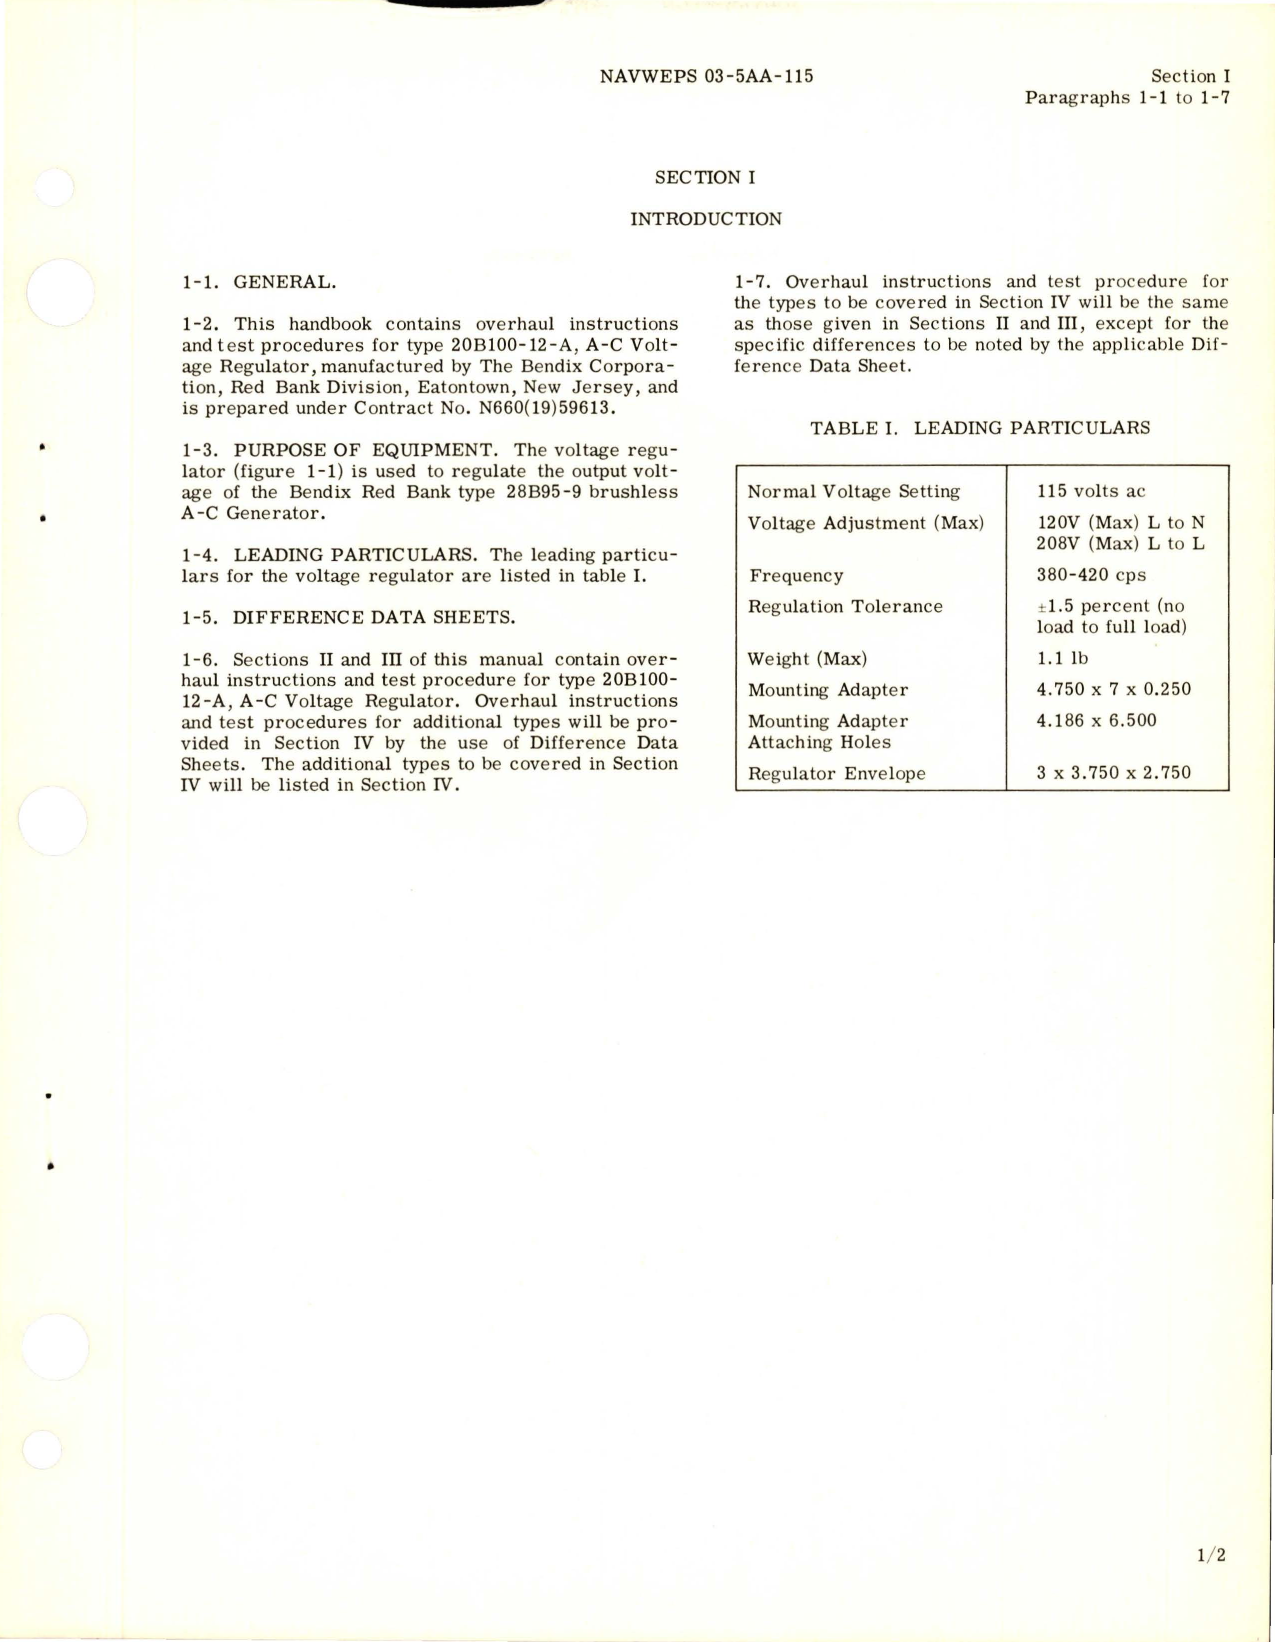 Sample page 5 from AirCorps Library document: Overhaul Instructions for A-C Voltage Regulator - Type 20B100-12-A 